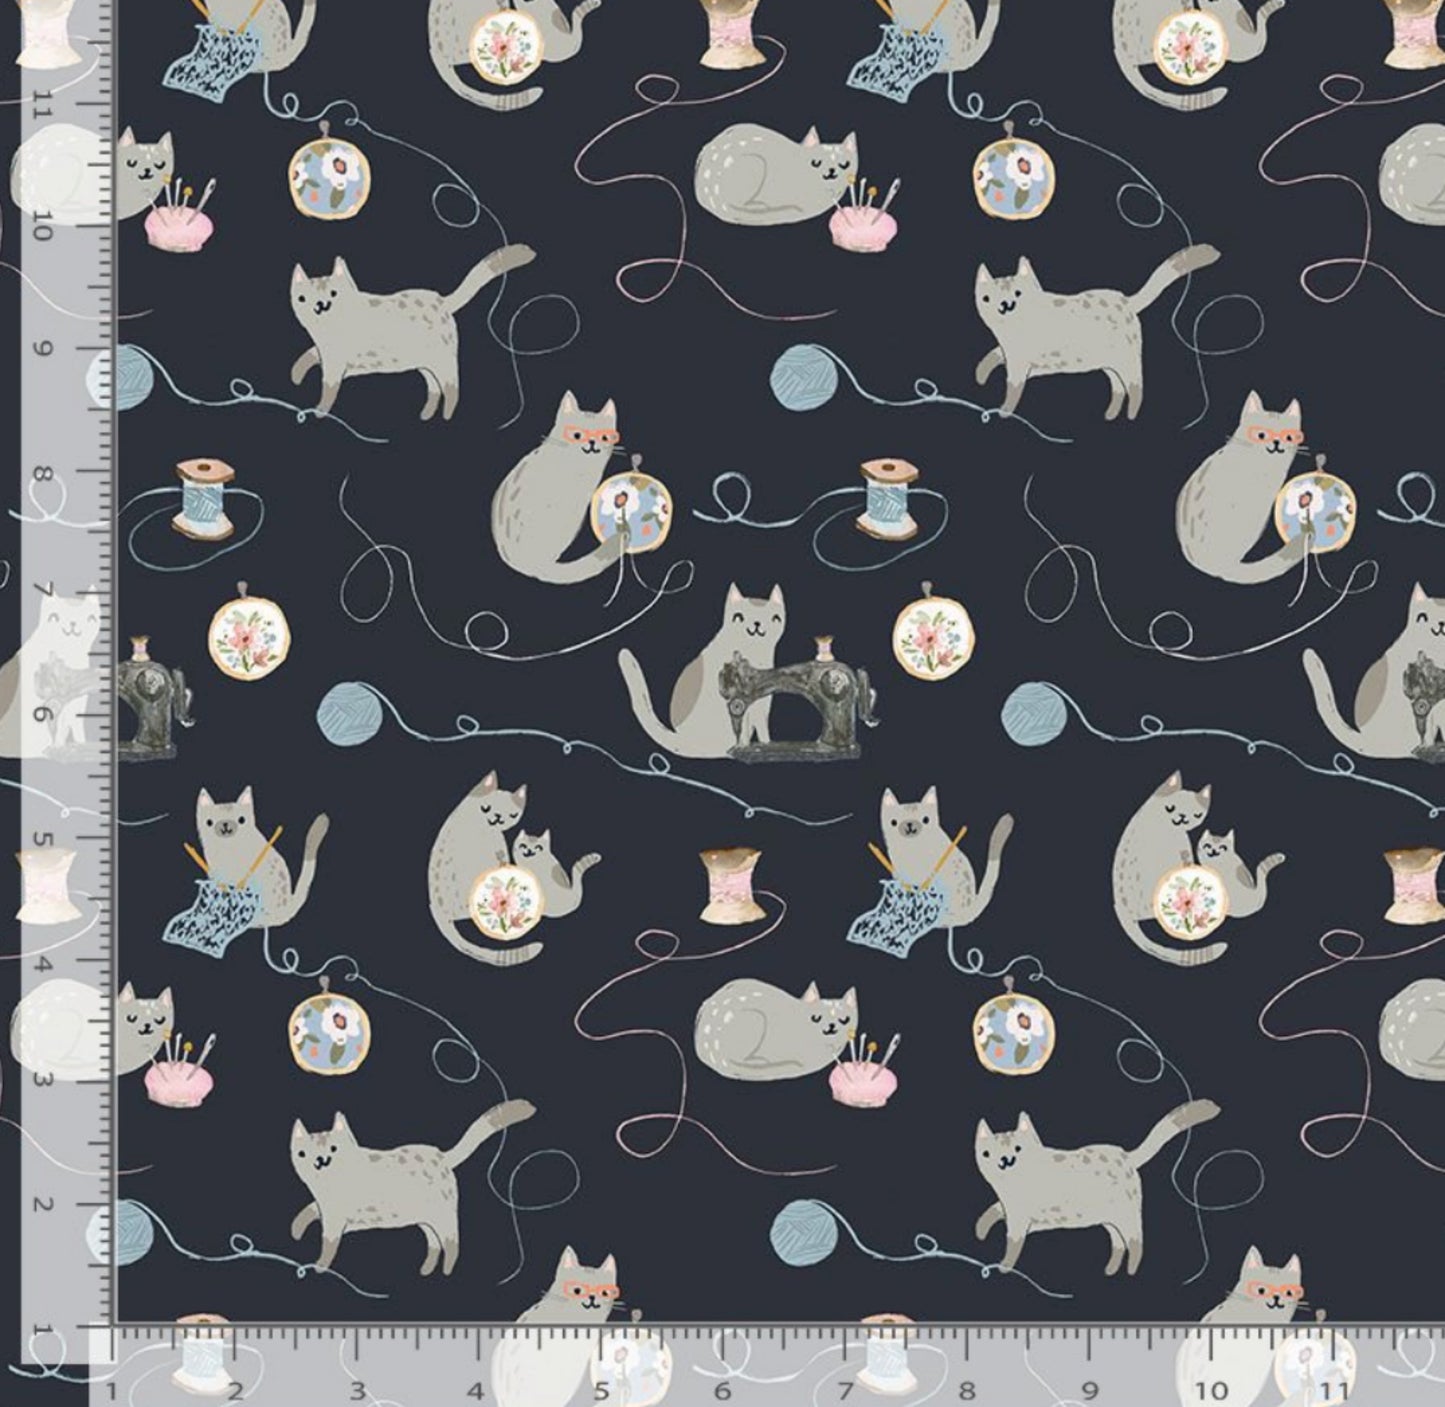 Sewing Cats - And Sew It Goes - Clara Jean for Dear Stella Fabrics